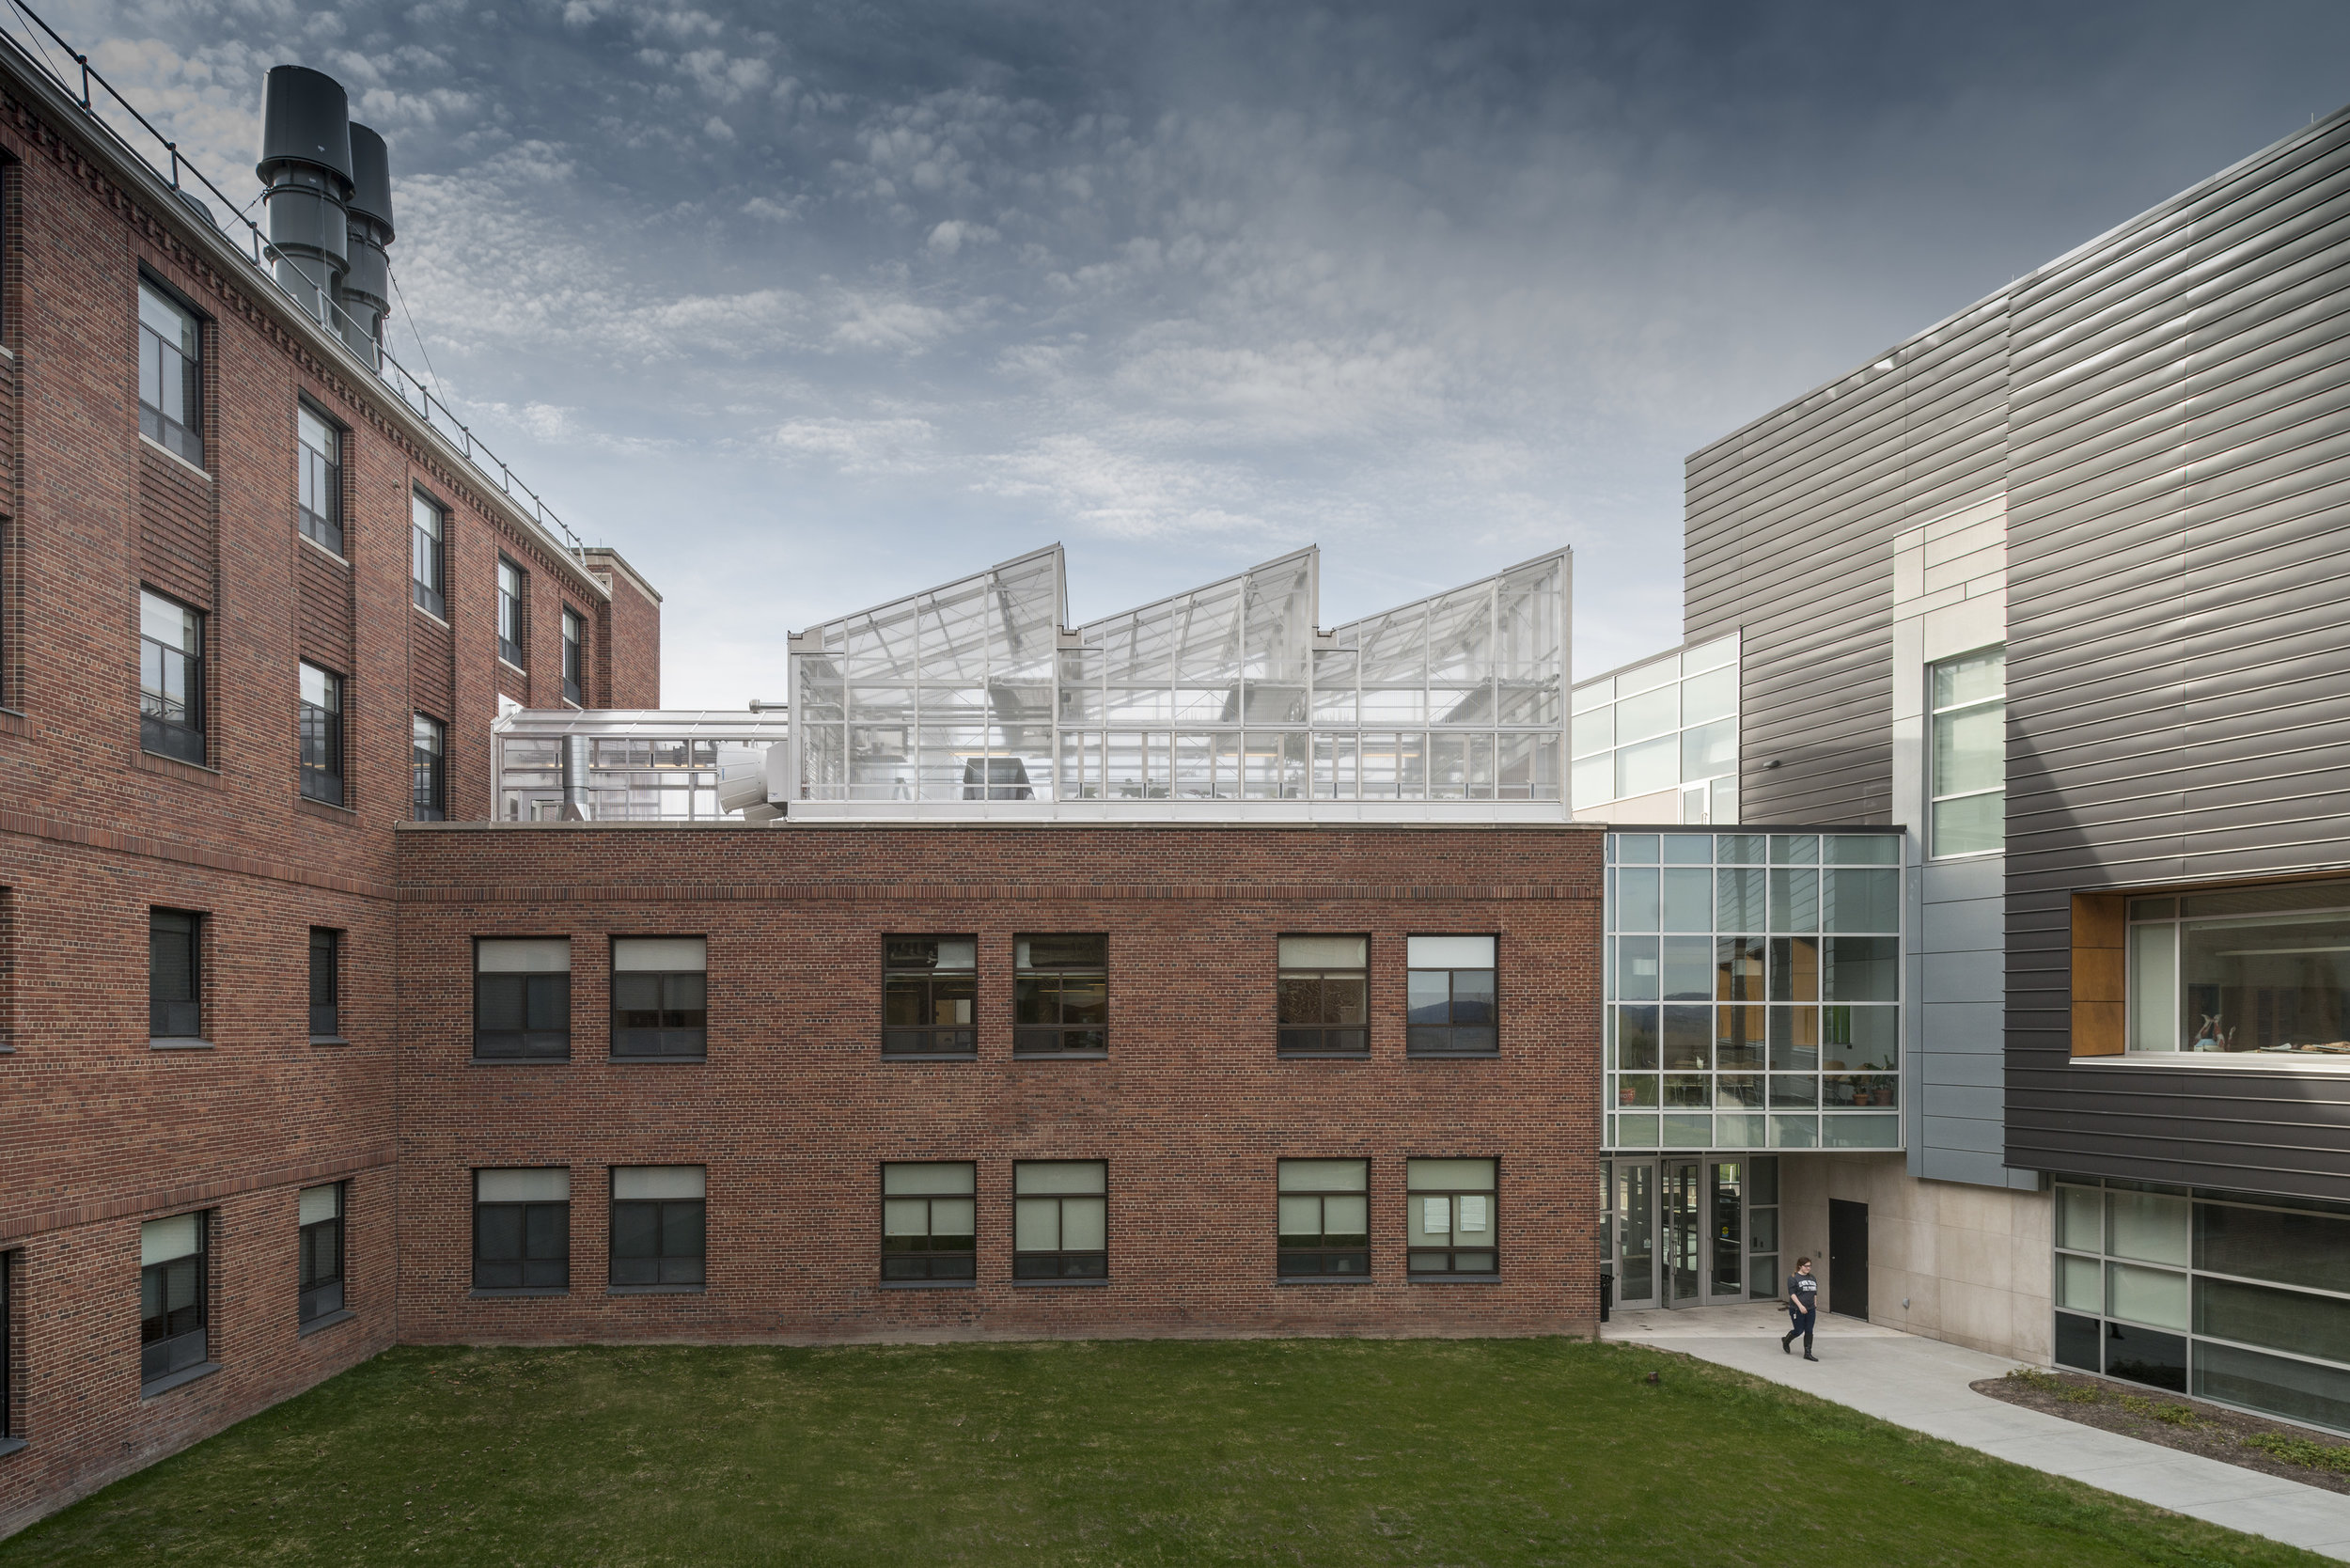 COYNE SCIENCE CENTER RENOVATION&lt;strong&gt;Provide academic and research laboratories for the Biology, Chemistry and Physics departments.&lt;/strong&gt;